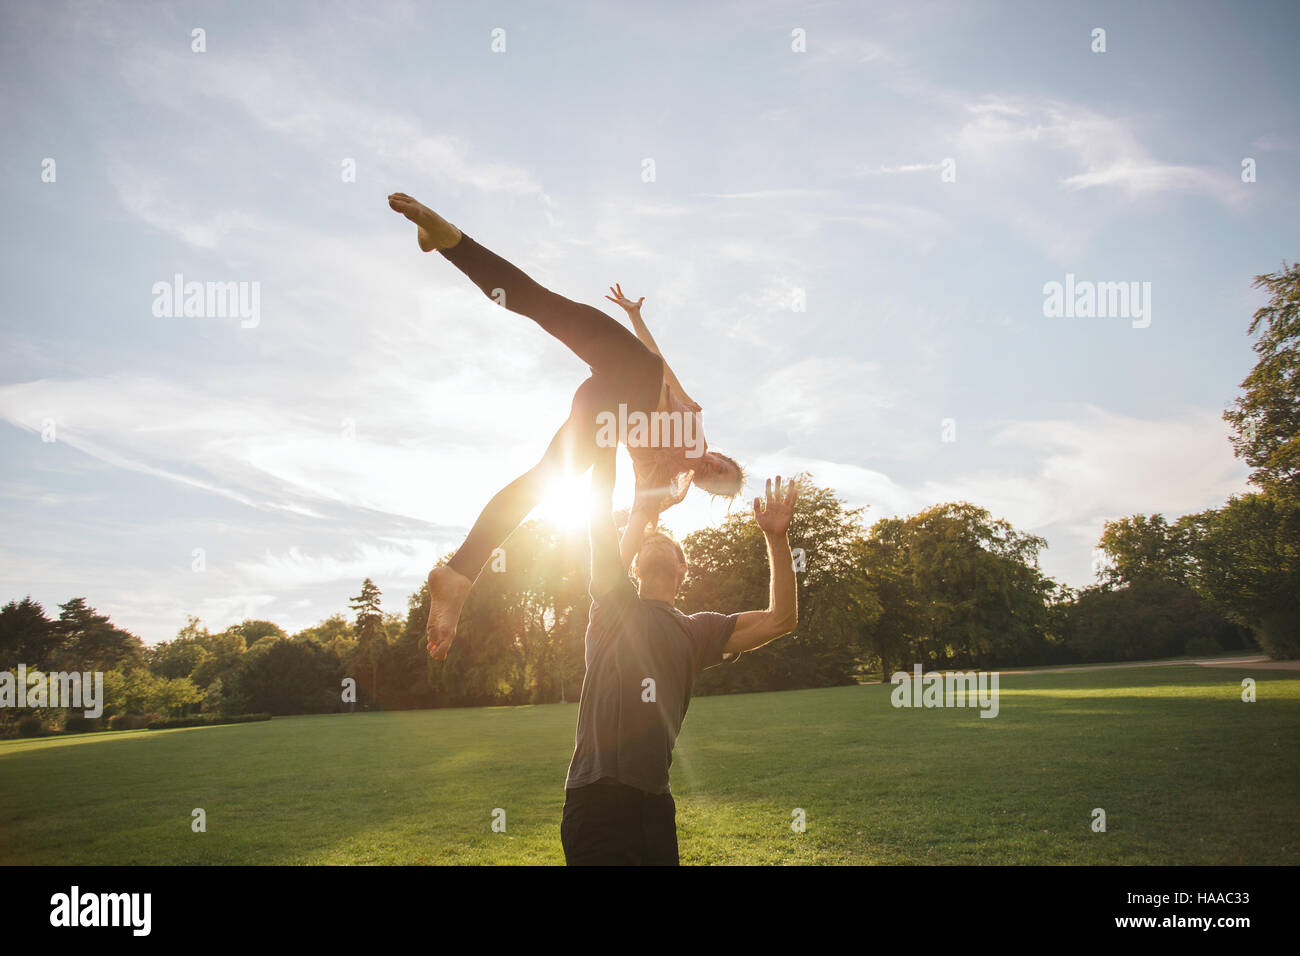 Healthy young man and woman doing various yoga poses in pair outdoors. Fit couple doing acroyoga in park. Stock Photo